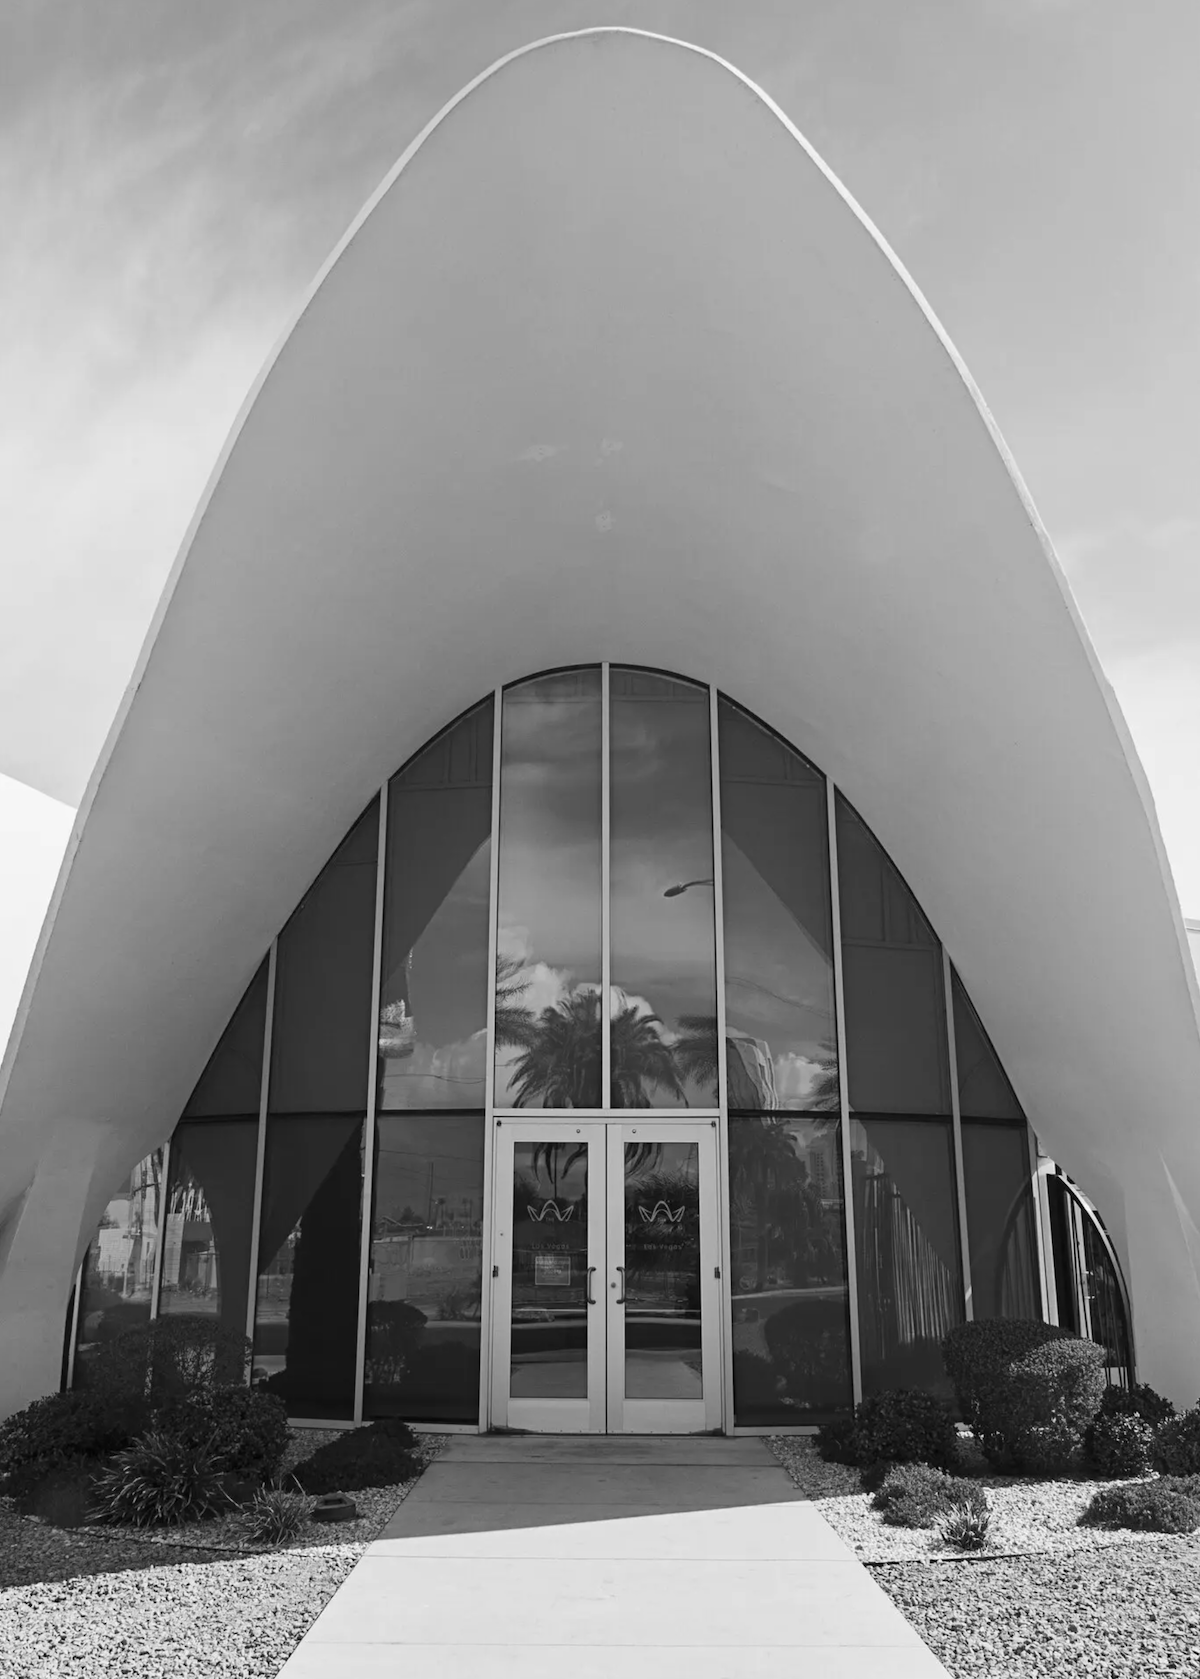 outdoor black and white photo of building facade shaped like a pointed seashell or similar style